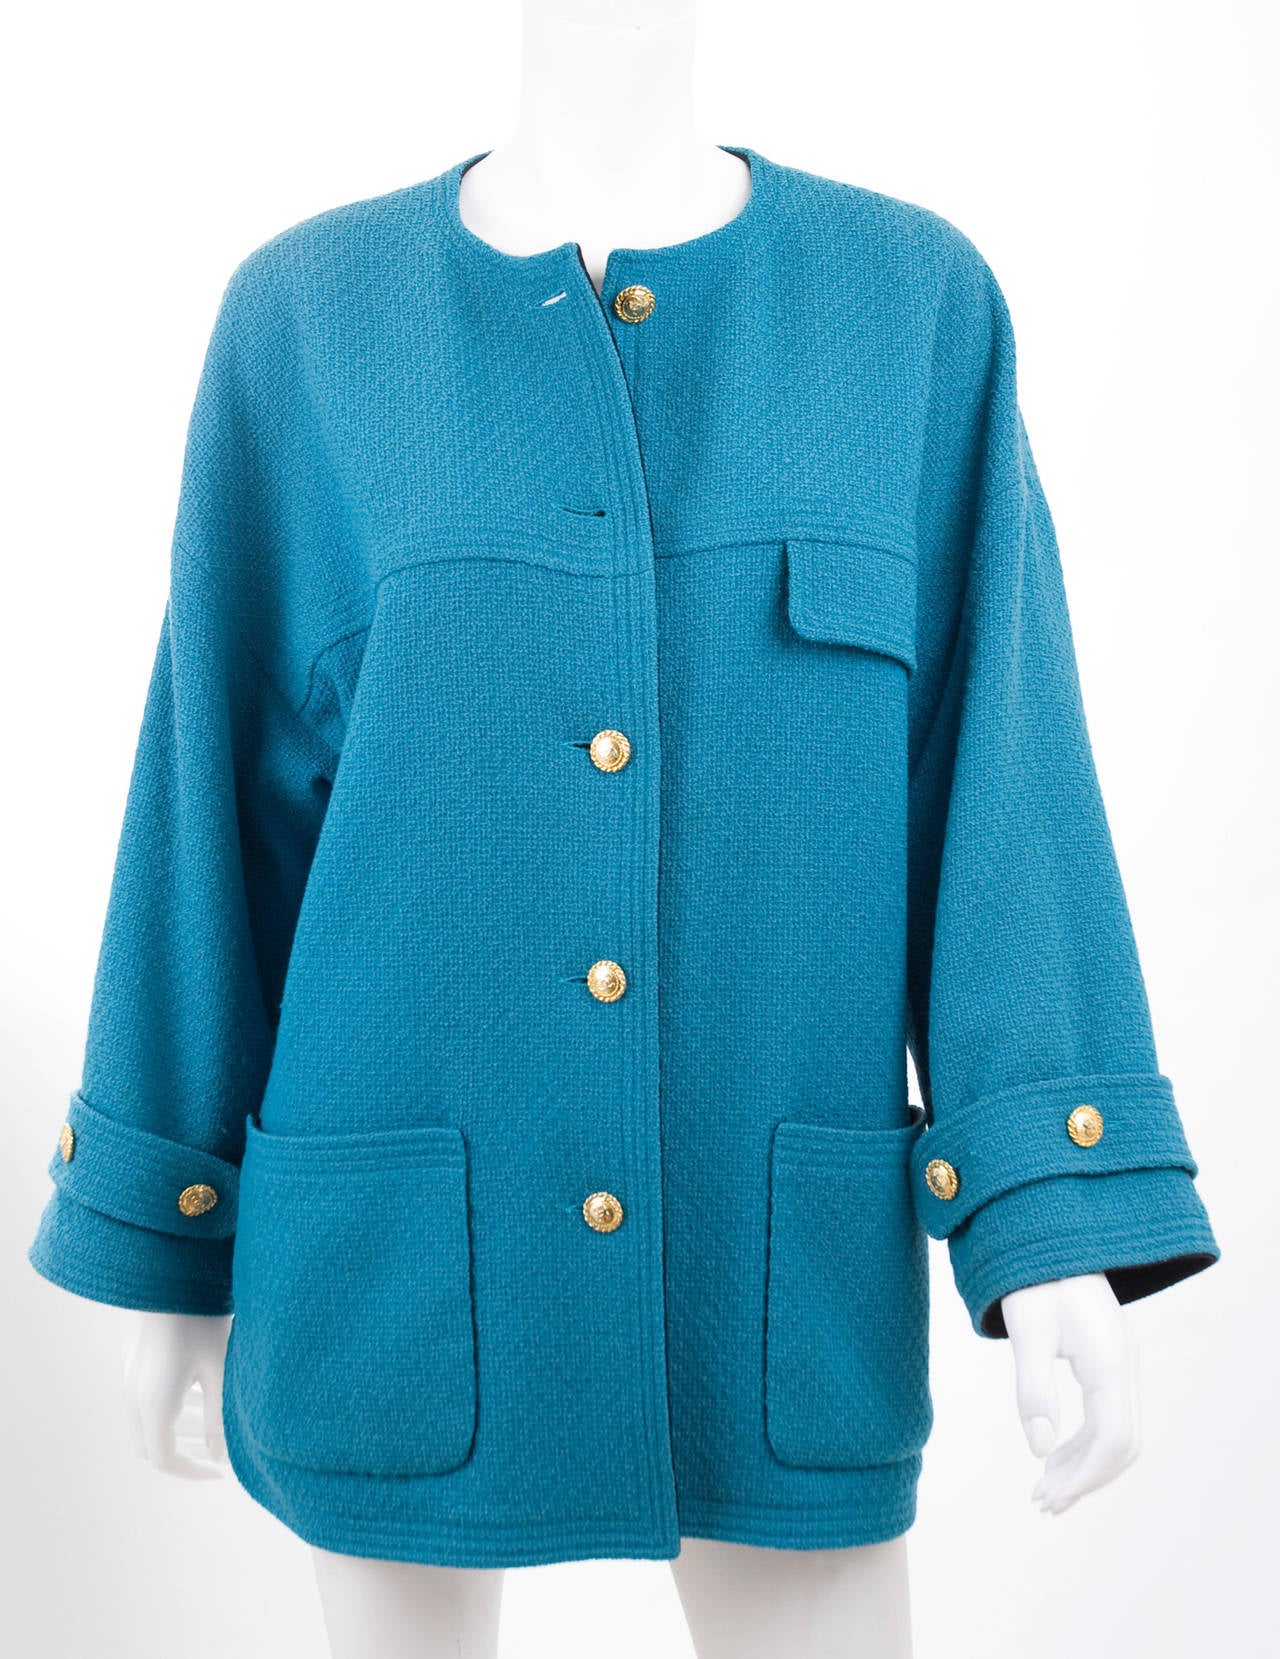 Chanel Jacket in Teal 1